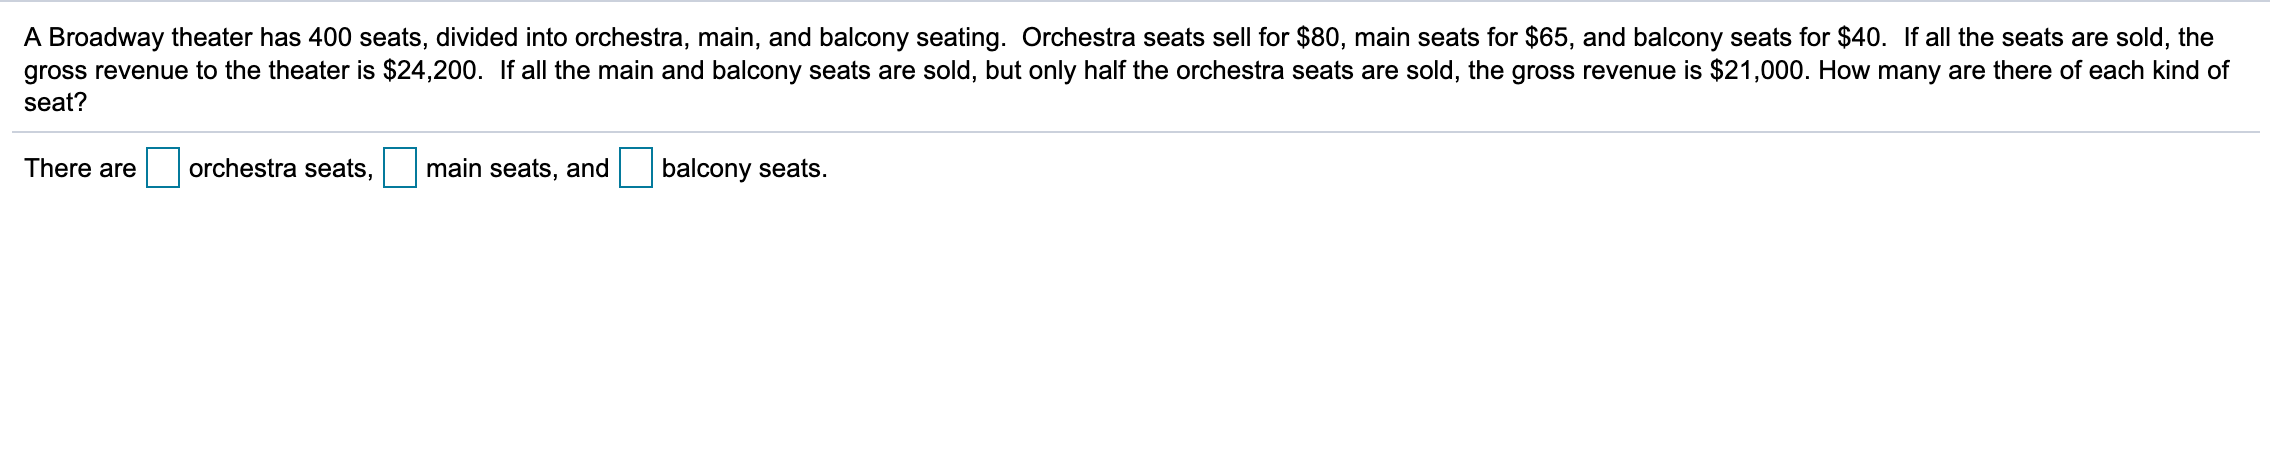 A Broadway theater has 400 seats, divided into orchestra, main, and balcony seating. Orchestra seats sell for $80, main seats for $65, and balcony seats for $40. If all the seats are sold, the
gross revenue to the theater is $24,200. If all the main and balcony seats are sold, but only half the orchestra seats are sold, the gross revenue is $21,000. How many are there of each kind of
seat?
There are
orchestra seats,
main seats, and
balcony seats.
